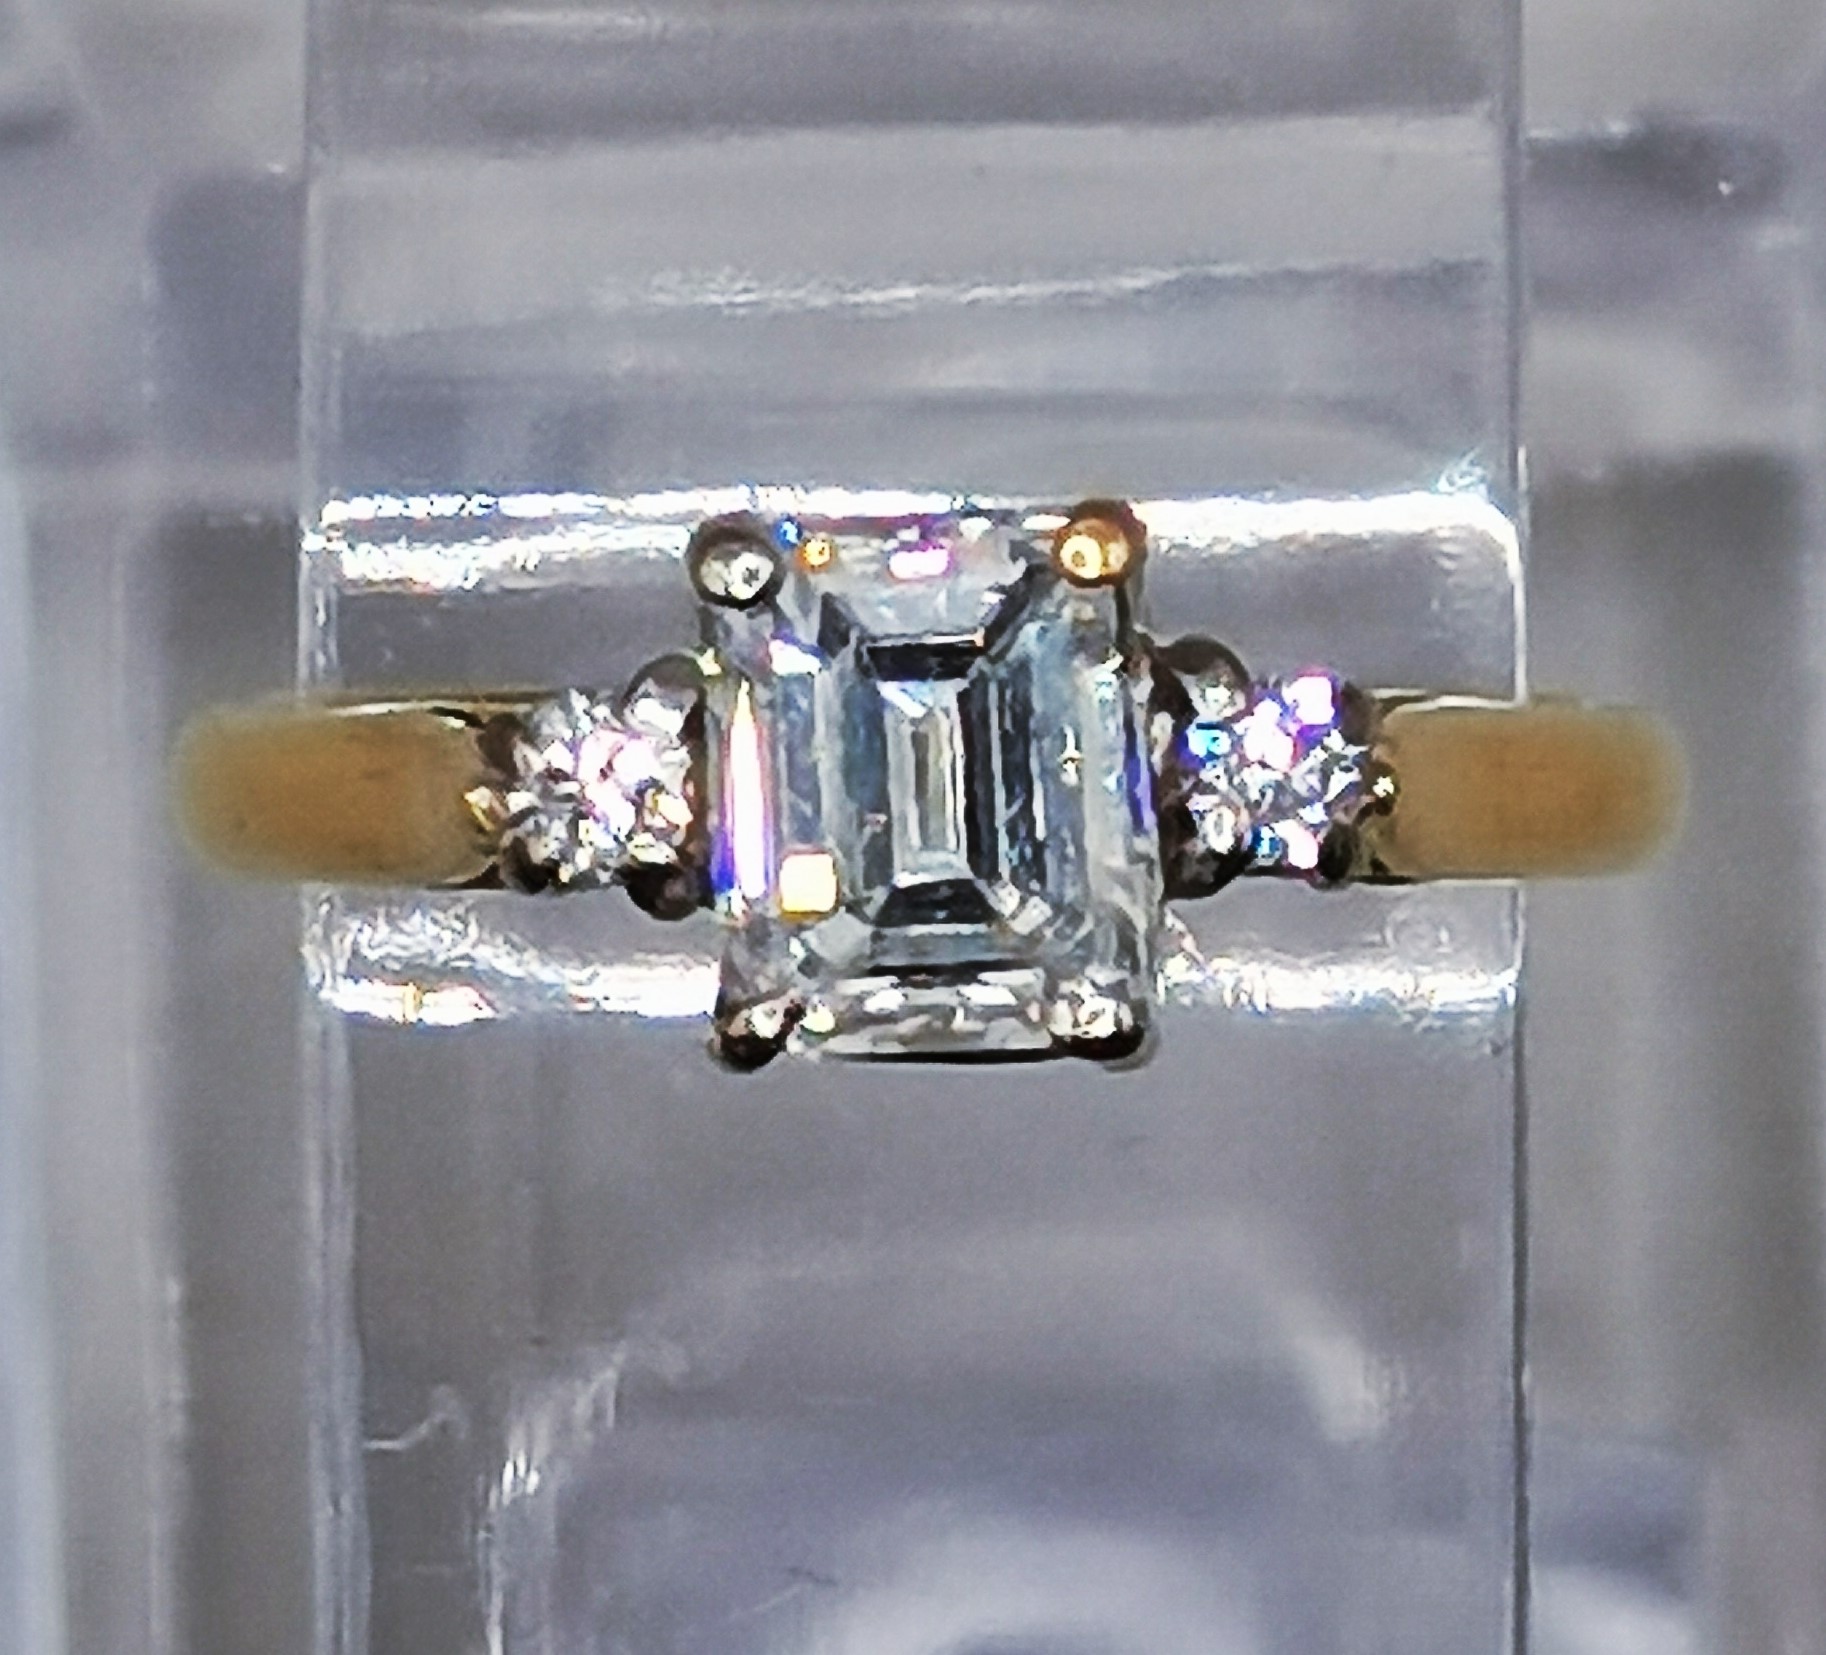 Diamond Ring - Emerald Cut 1.03 with 10 points either side in 18carat yellow gold size J - Image 5 of 9